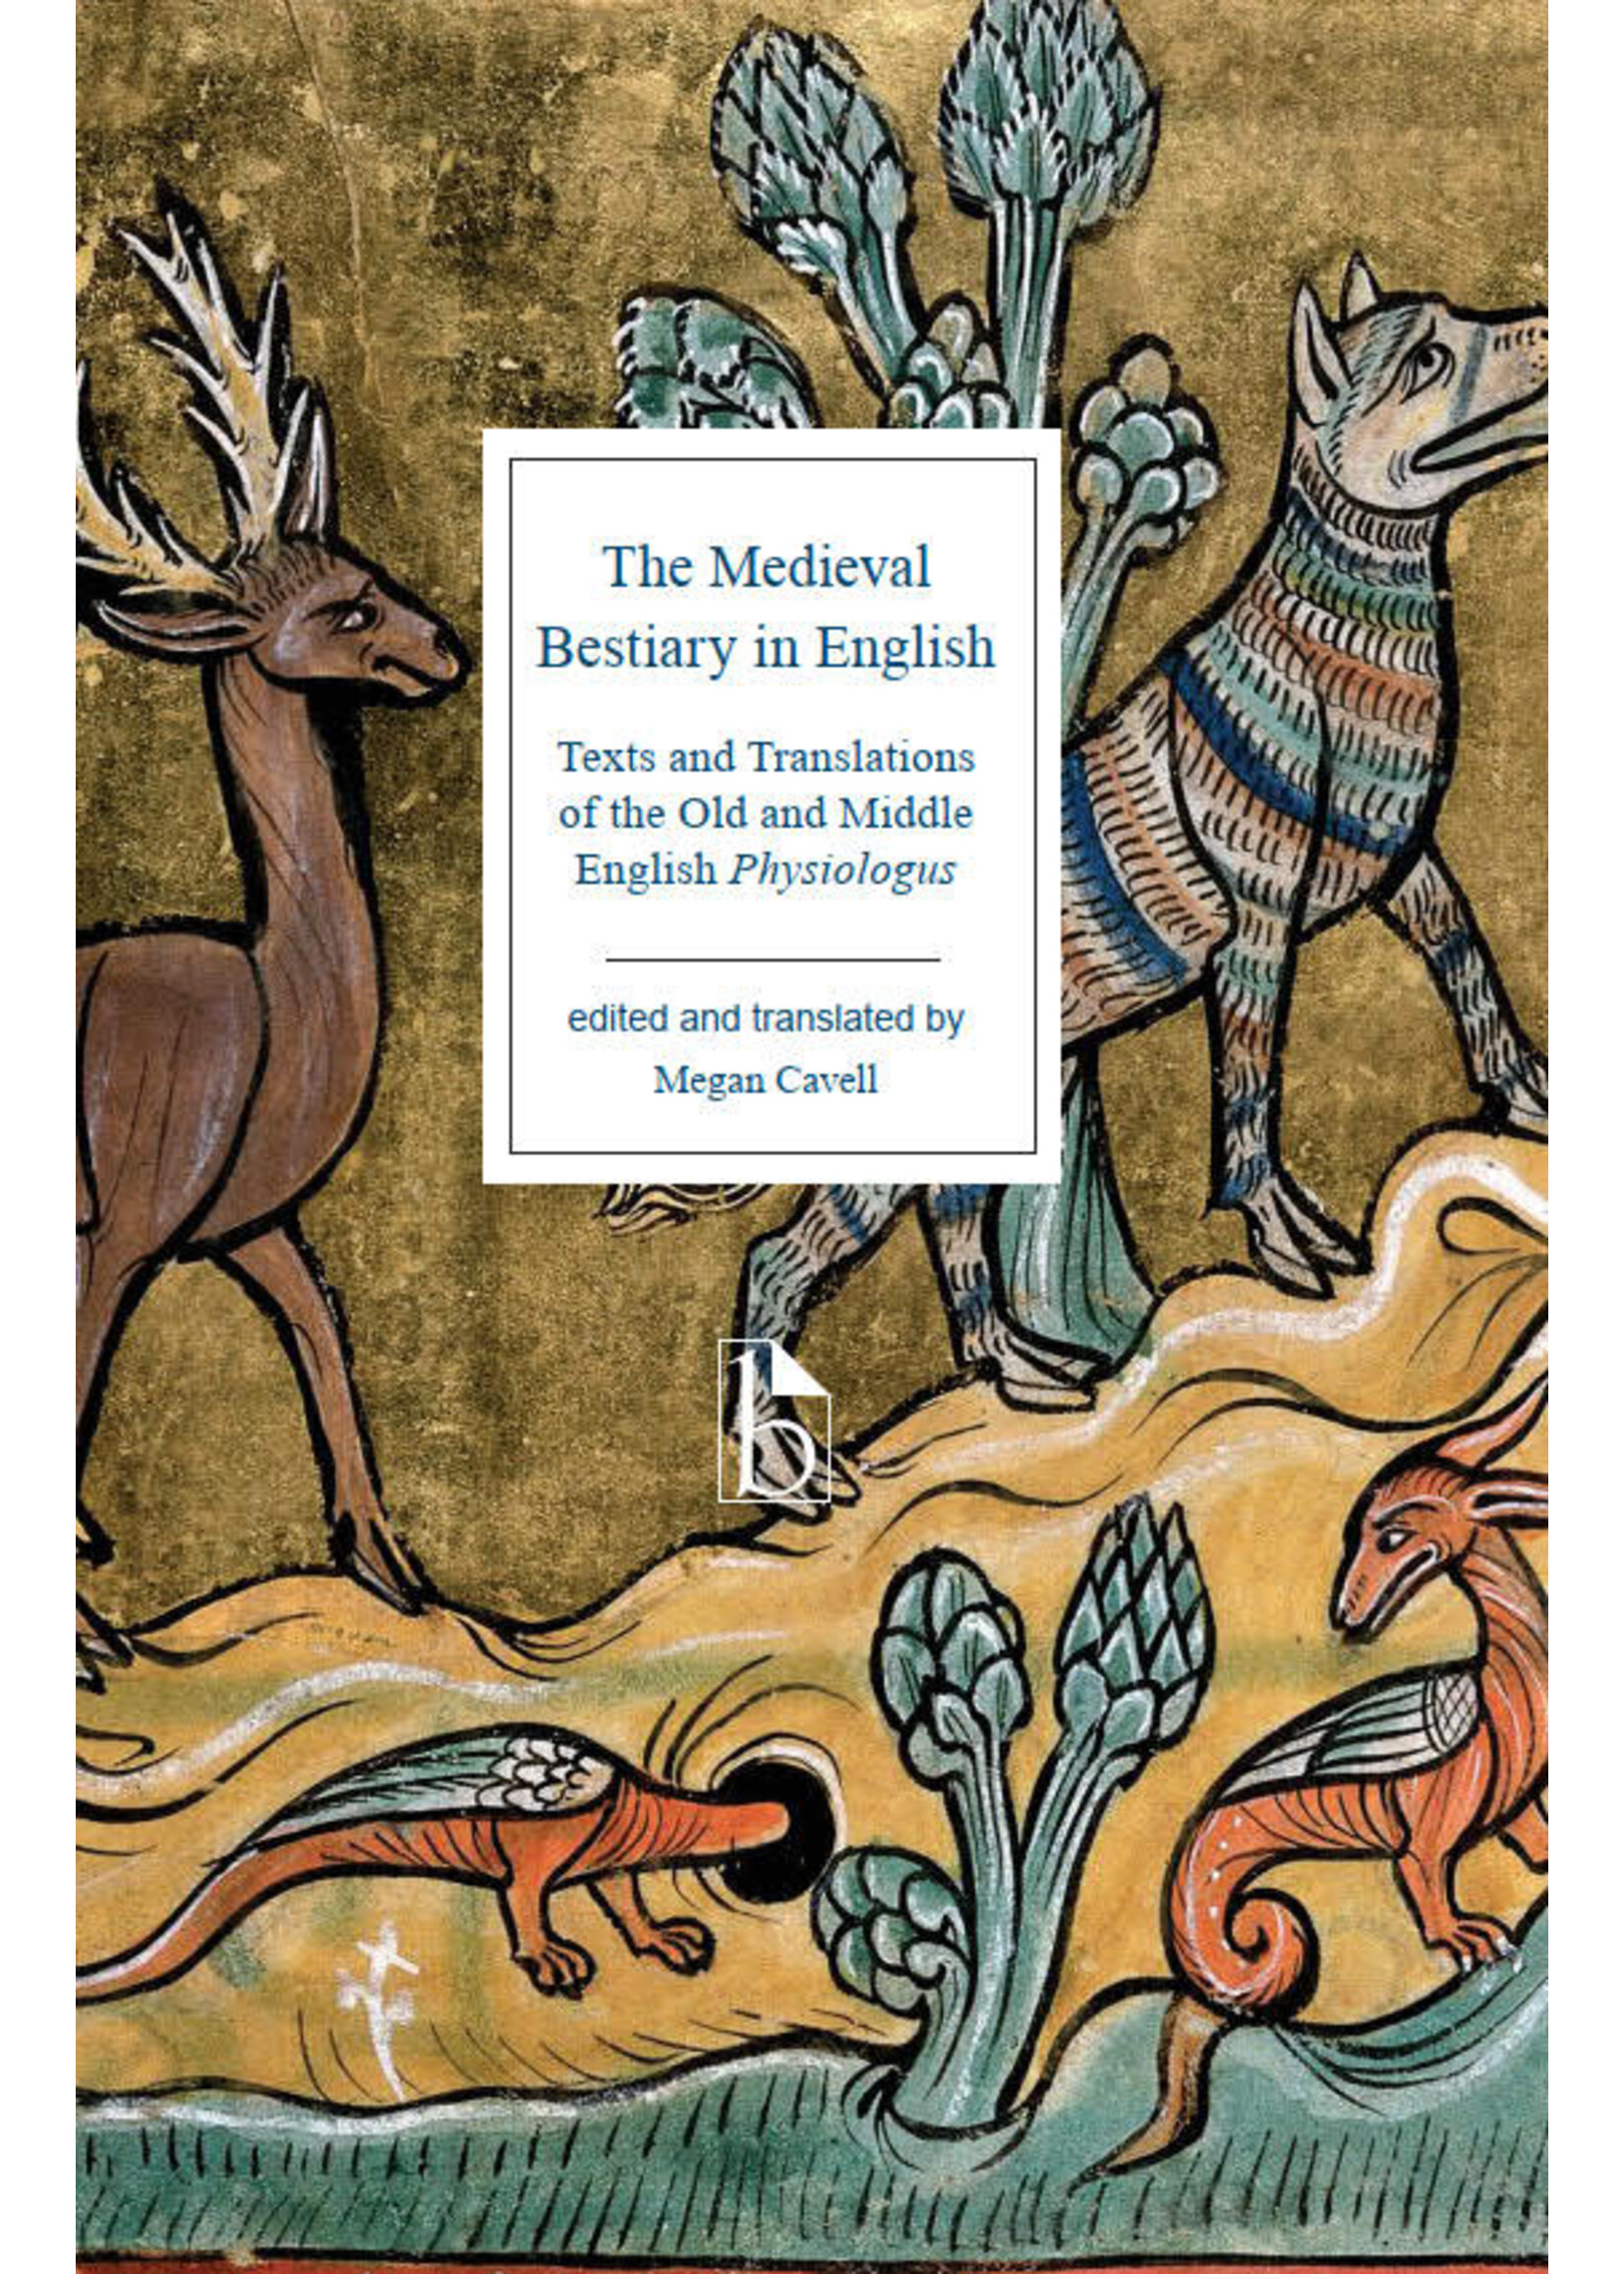 The Medieval Bestiary in English: Texts and Translations of the Old and Middle English Physiologus by Megan Cavell